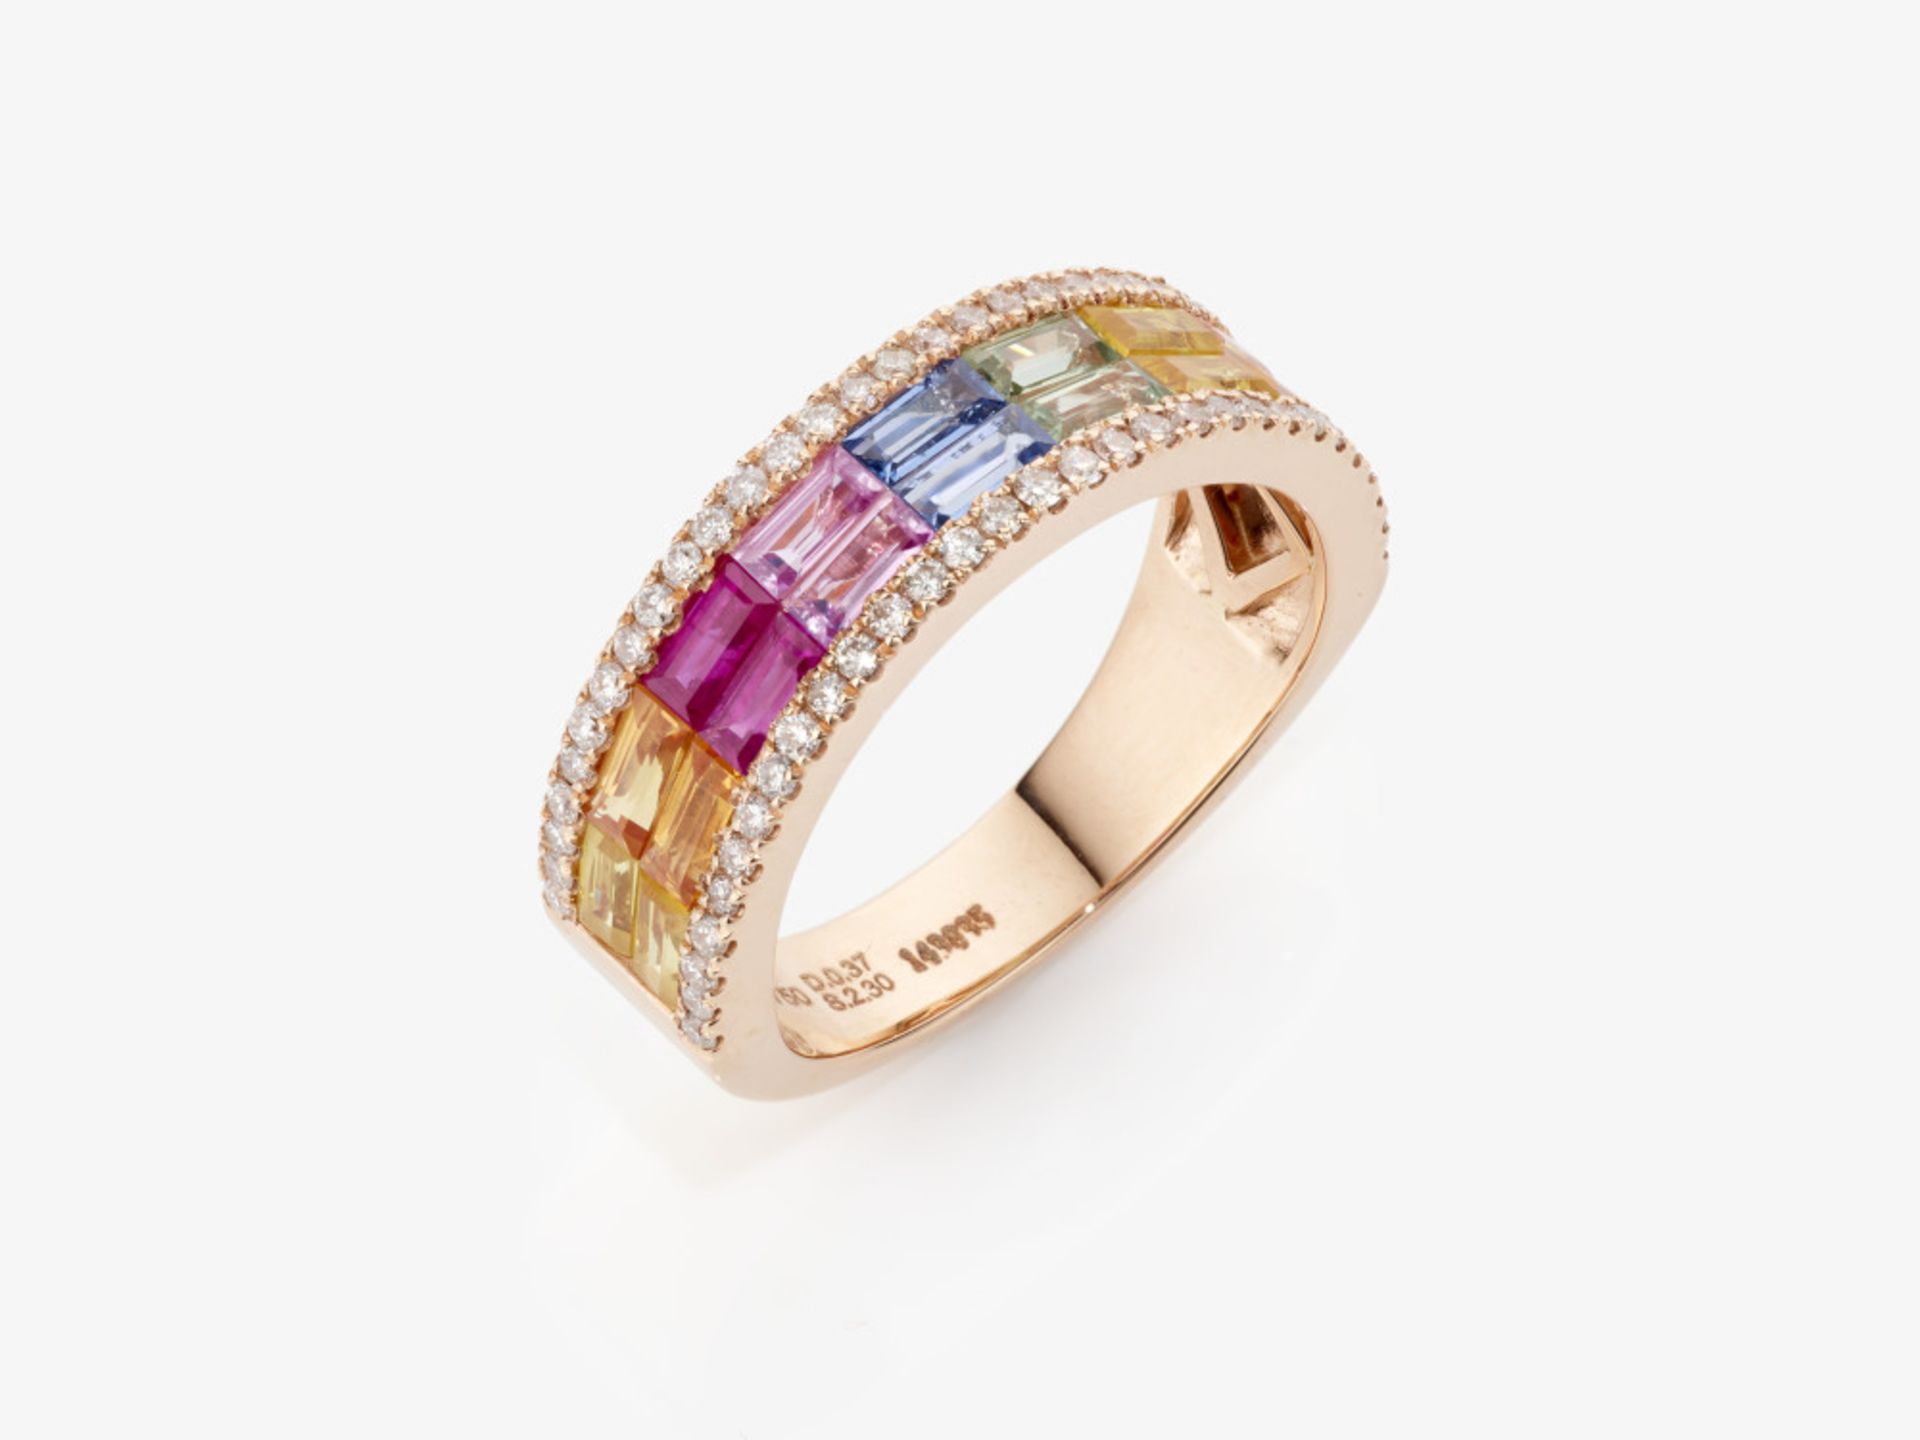 A band ring decorated with multi-coloured sapphires and brilliant-cut diamonds